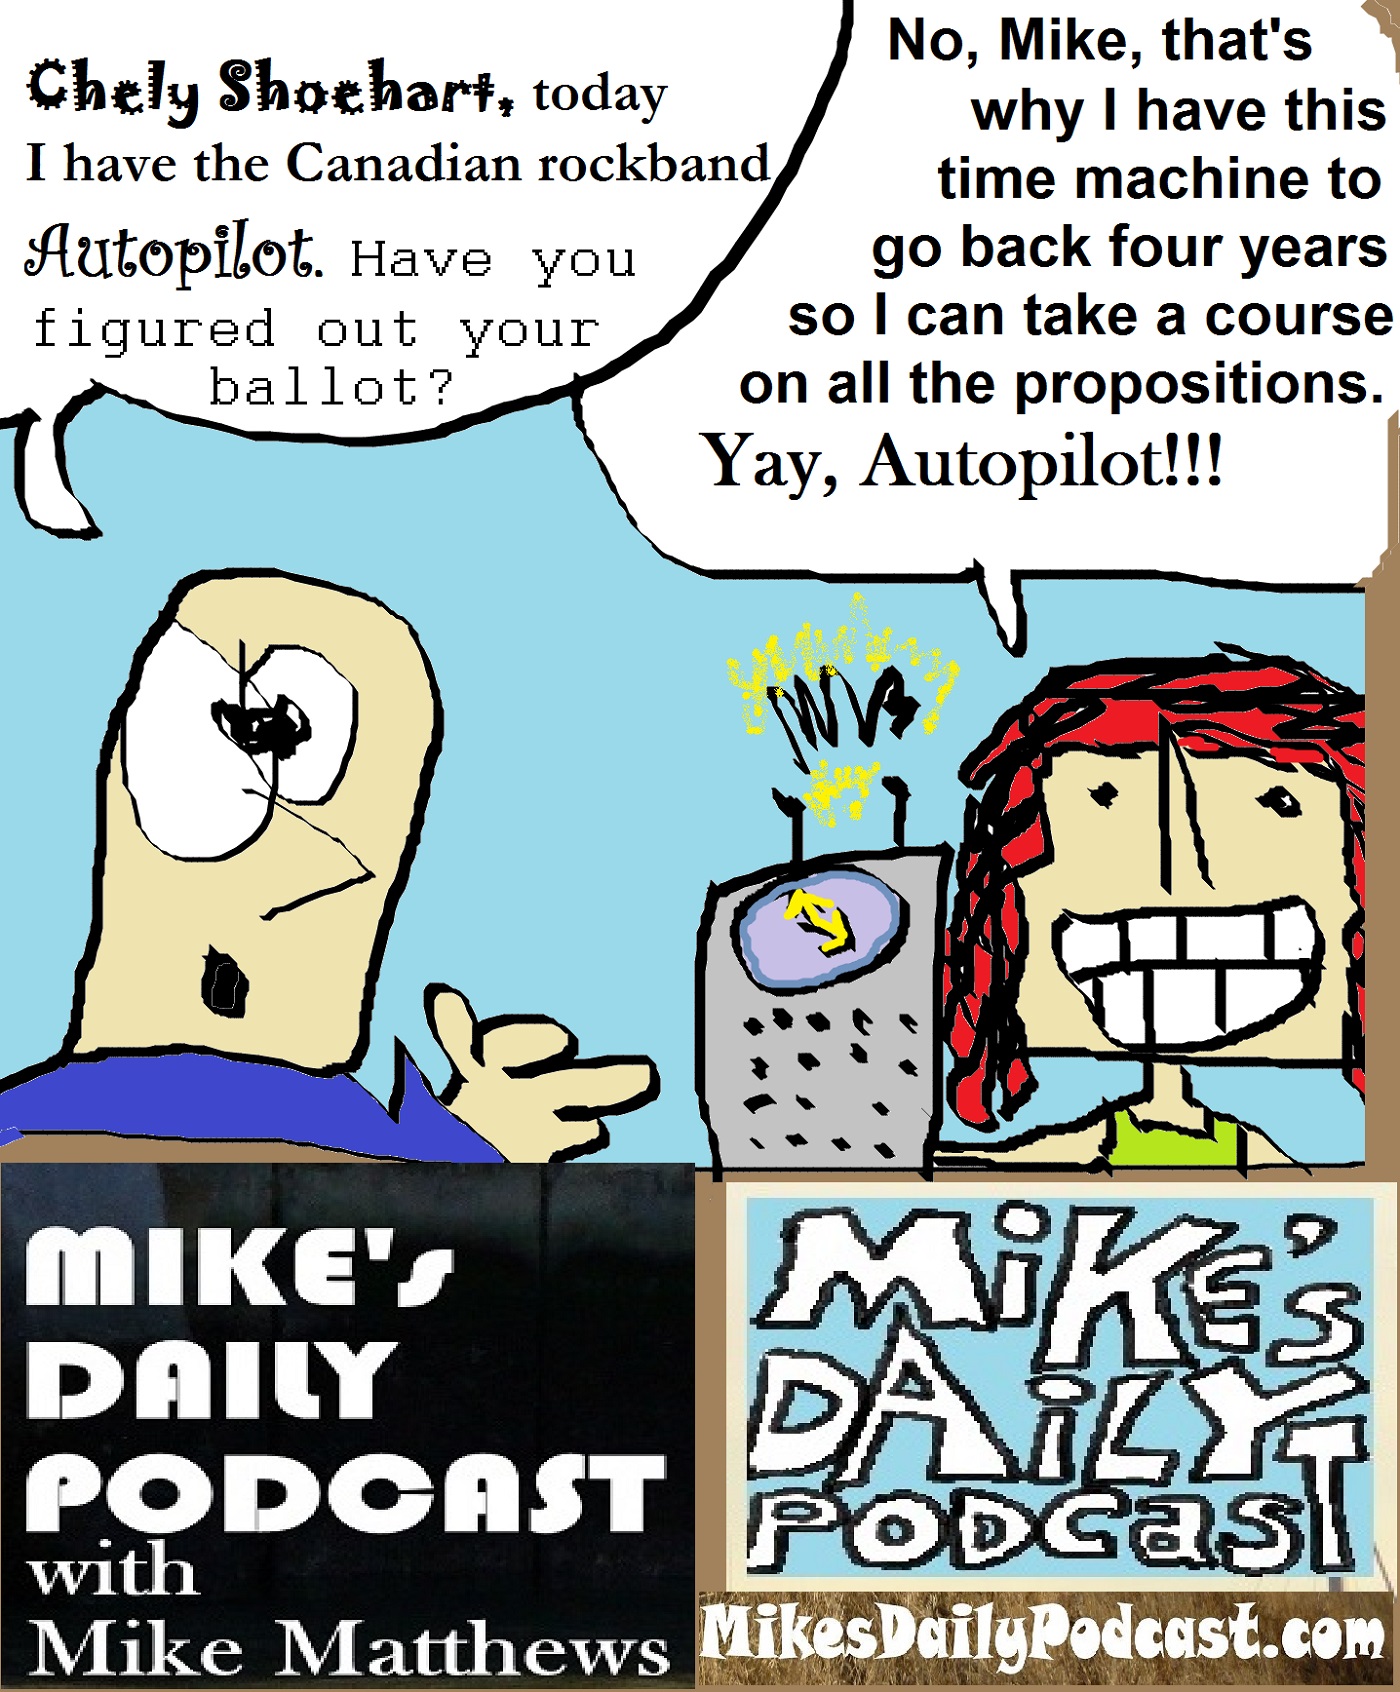 mikes-daily-podcast-1214-autopilot-propositions